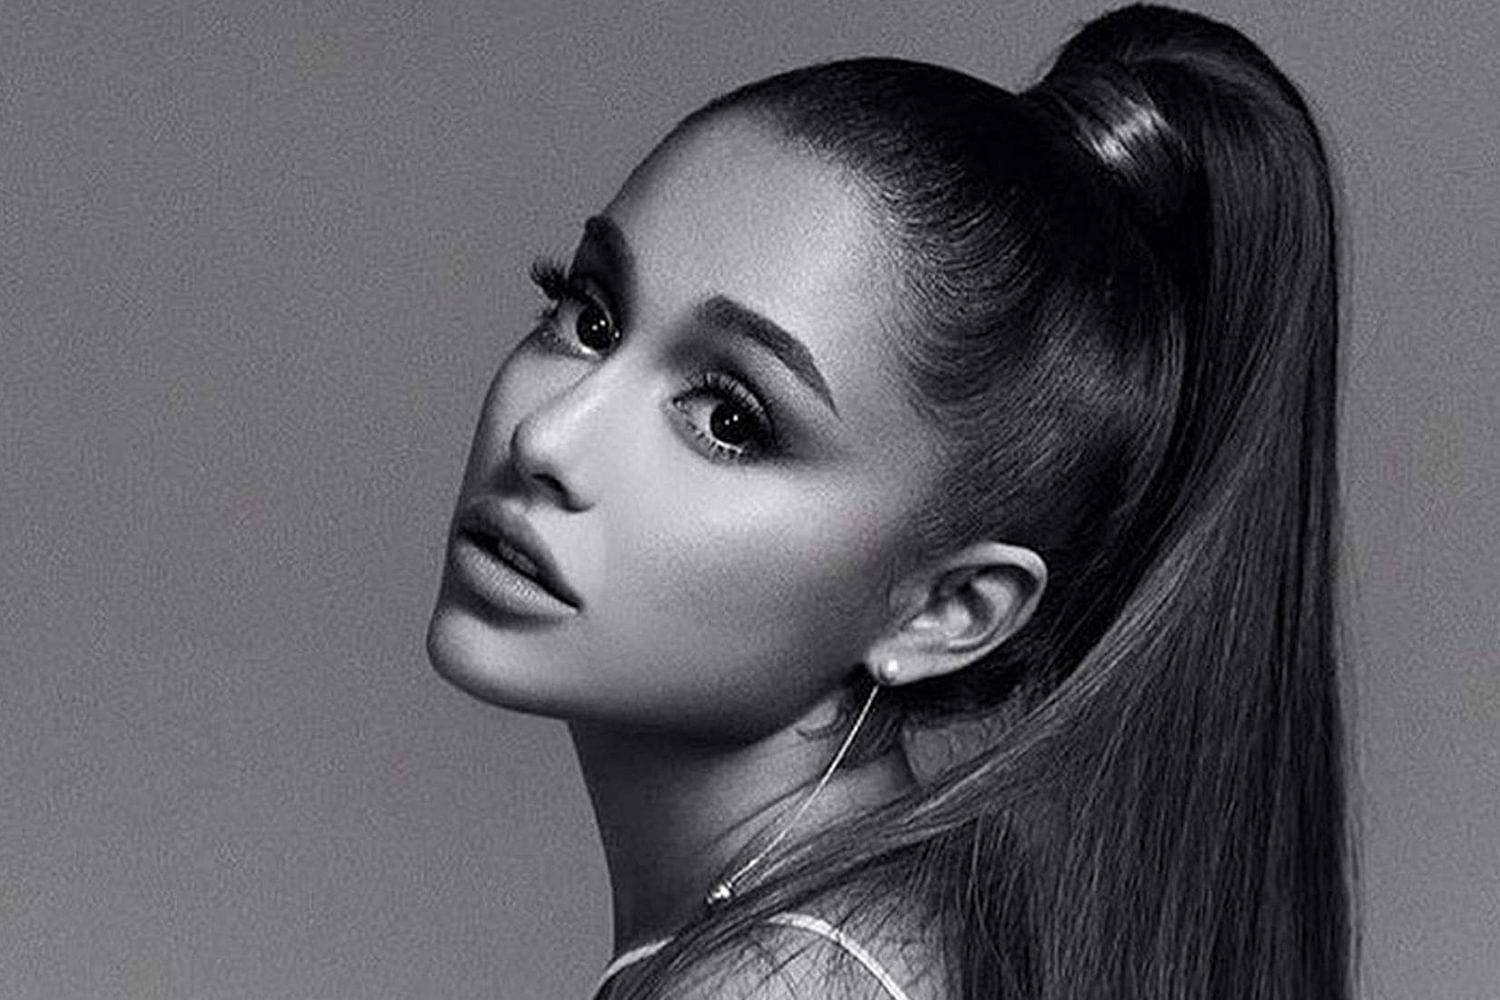 Ariana Grande teases ‘Positions’